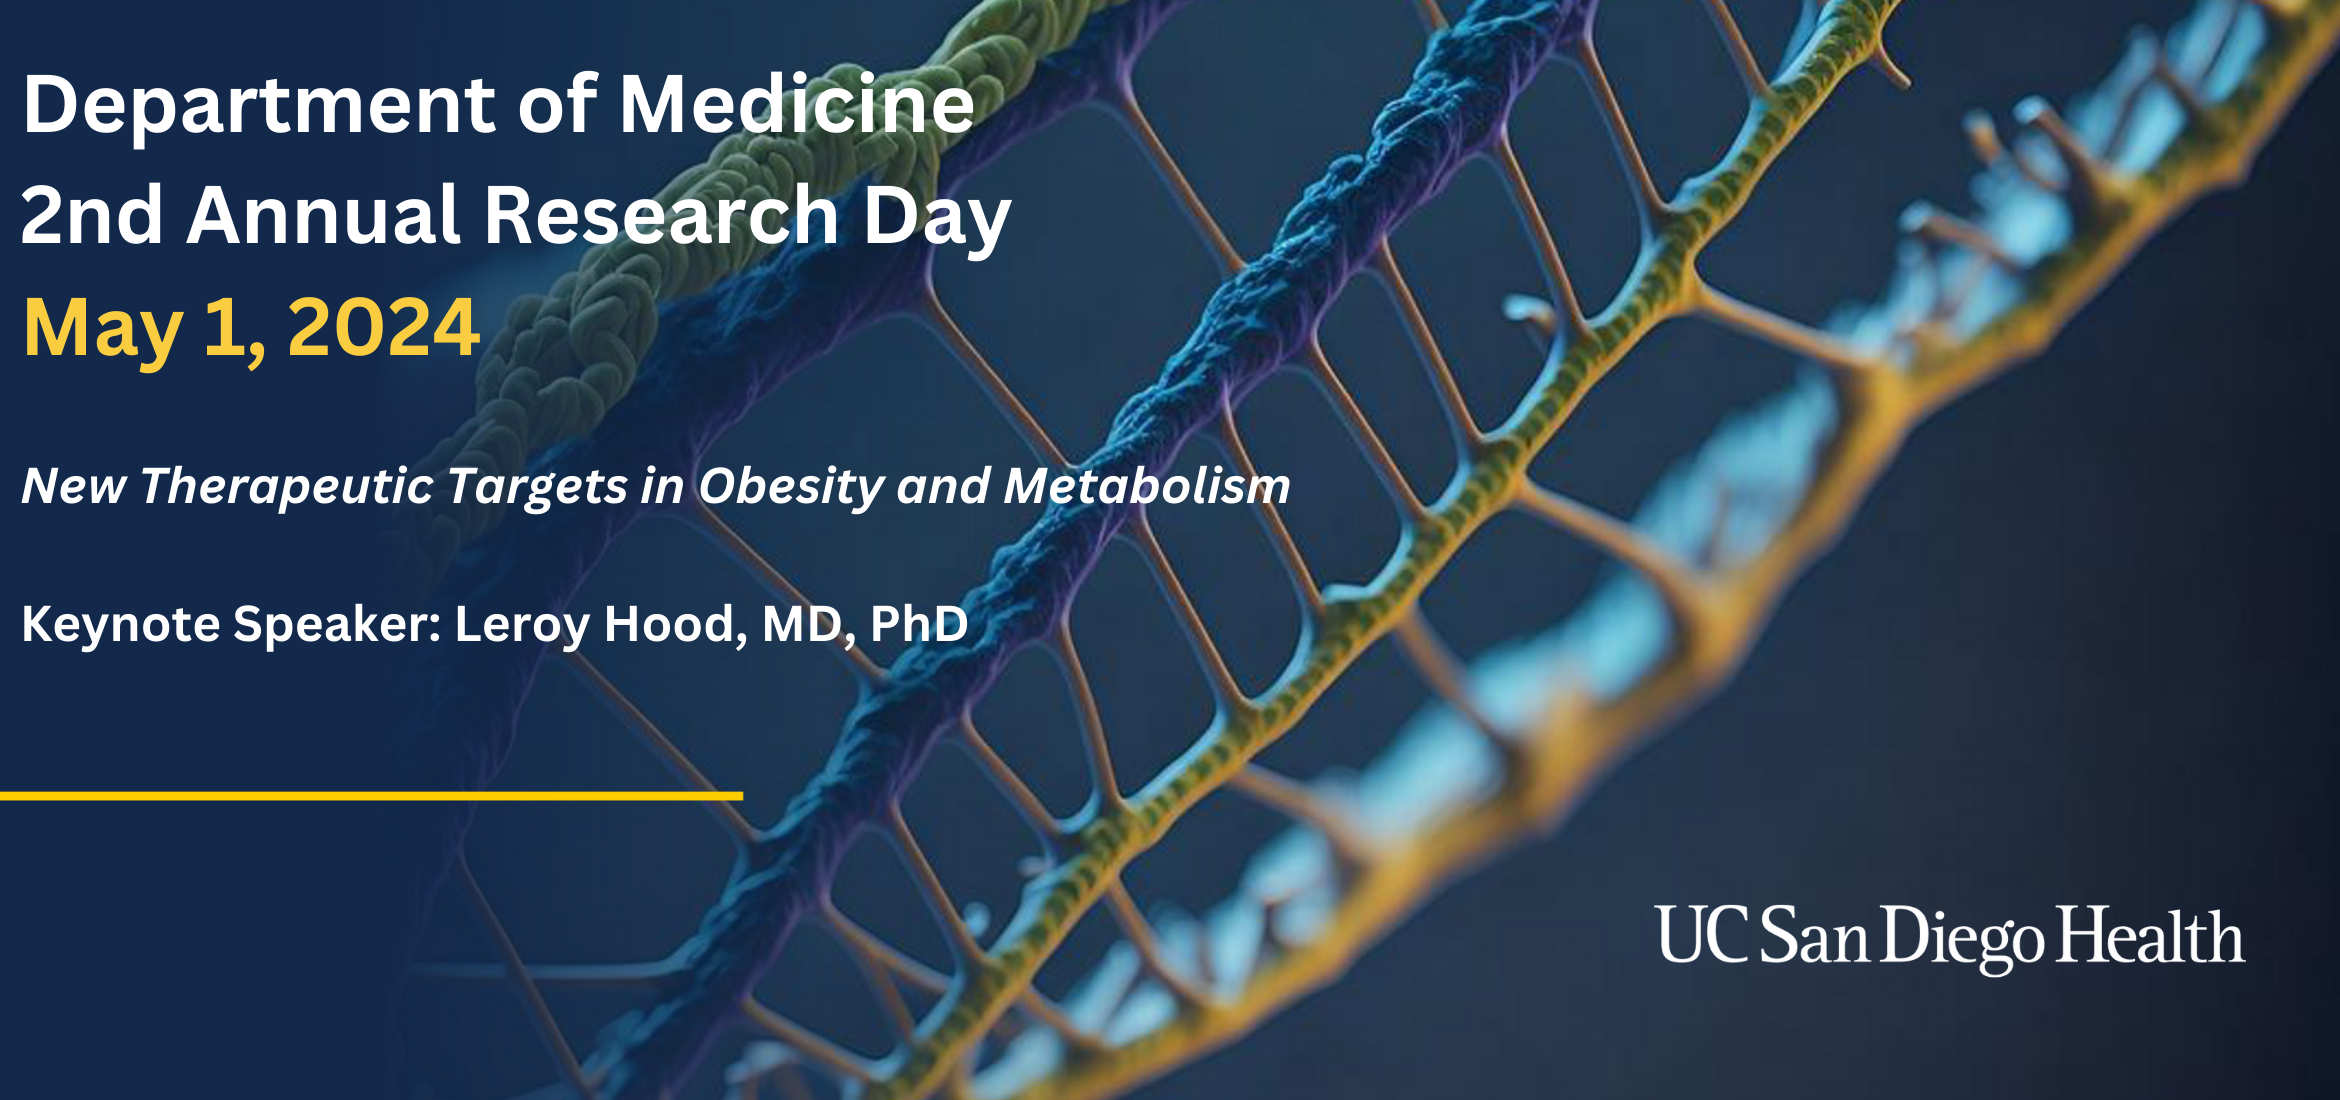 UC San Diego Department of Medicine: 2nd Annual Research Day Banner